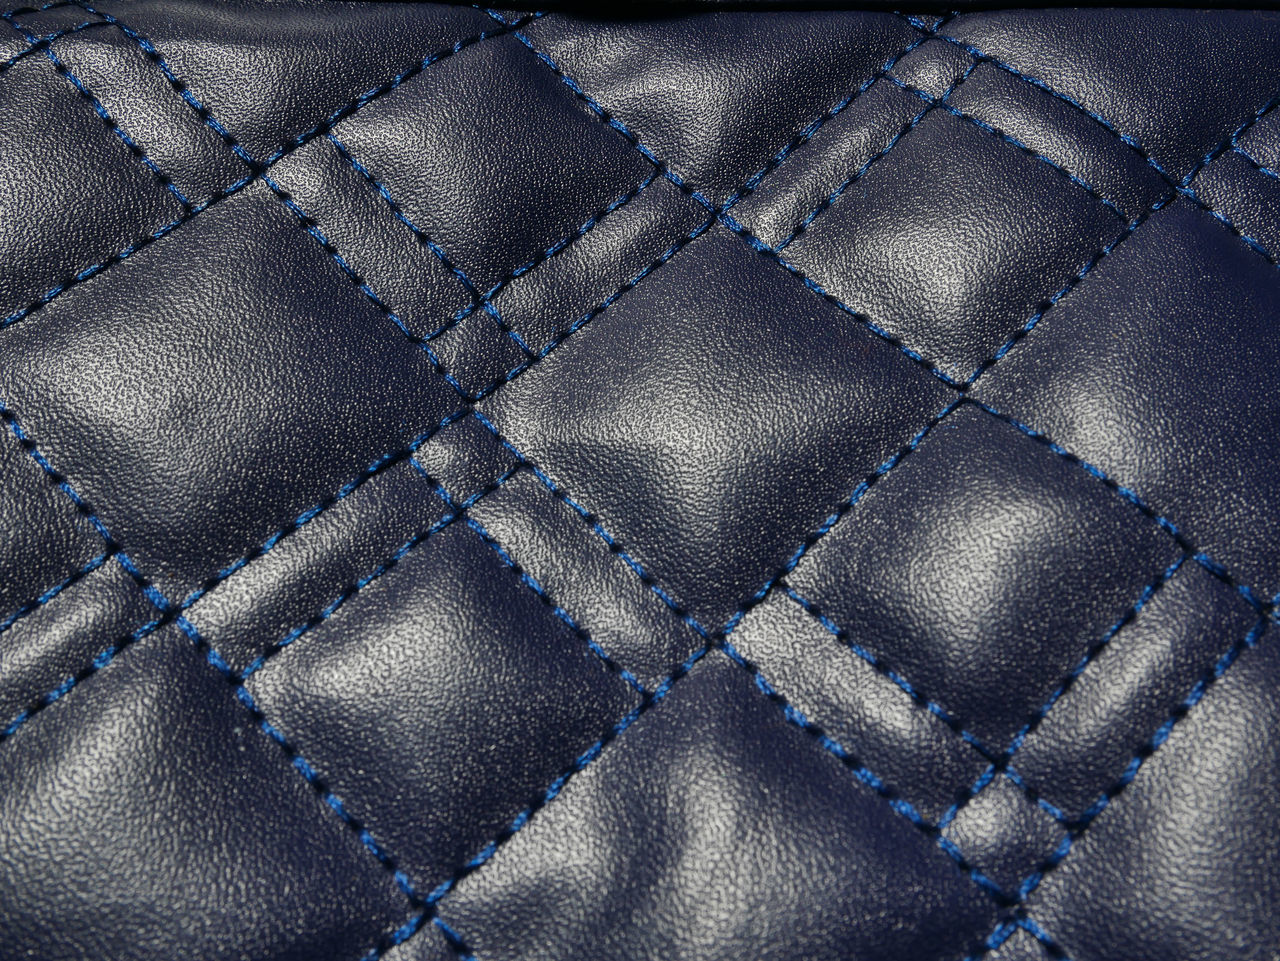 blue, backgrounds, full frame, pattern, textured, close-up, no people, textile, circle, leather, indoors, line, material